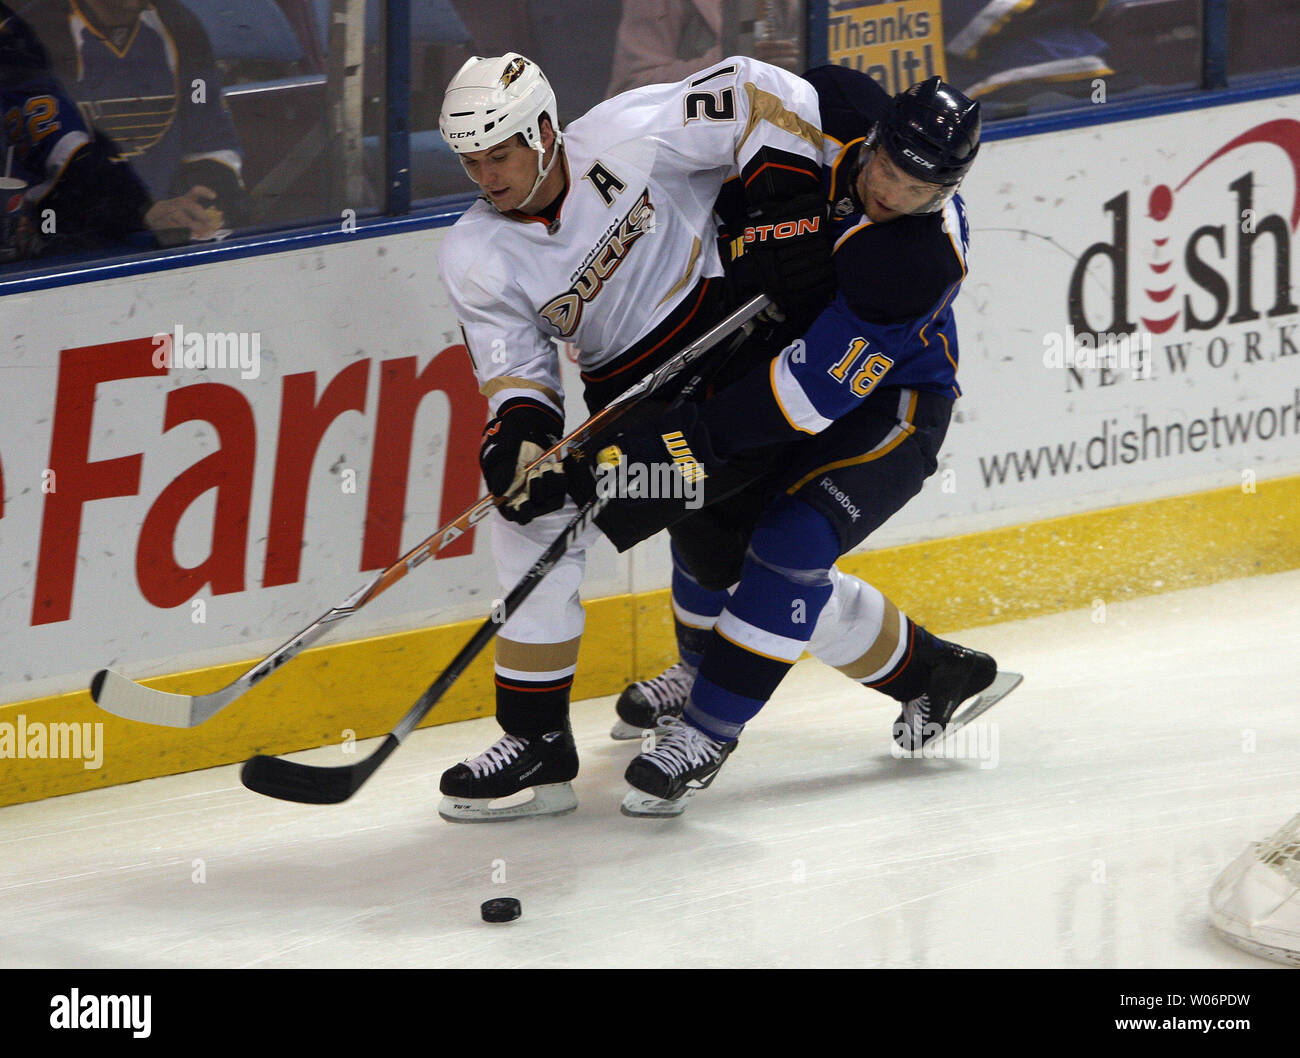 St. Louis Blues Jay McClement (18) and Anaheim Ducks Sheldon Brookbank battle for the puck in the first period at the Scottrade Center in St. Louis on April 9, 2010.   UPI/Bill Greenblatt Stock Photo